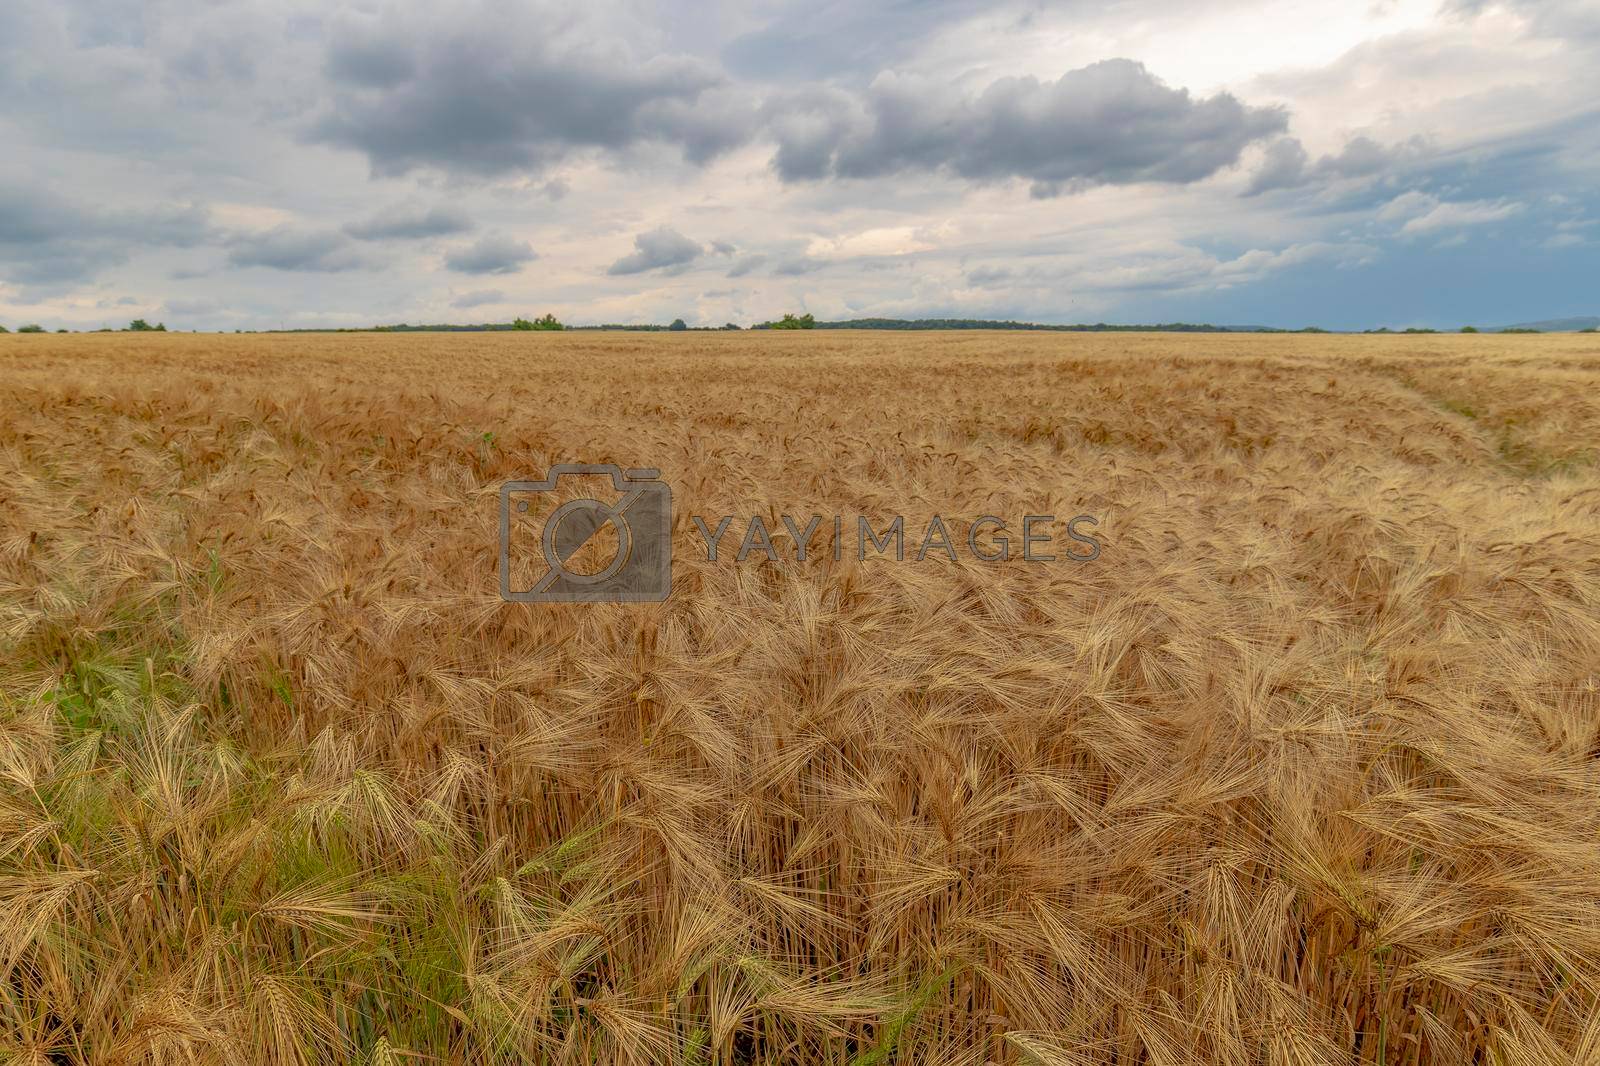 The stunning landscape of ripe barley and cloudy sky